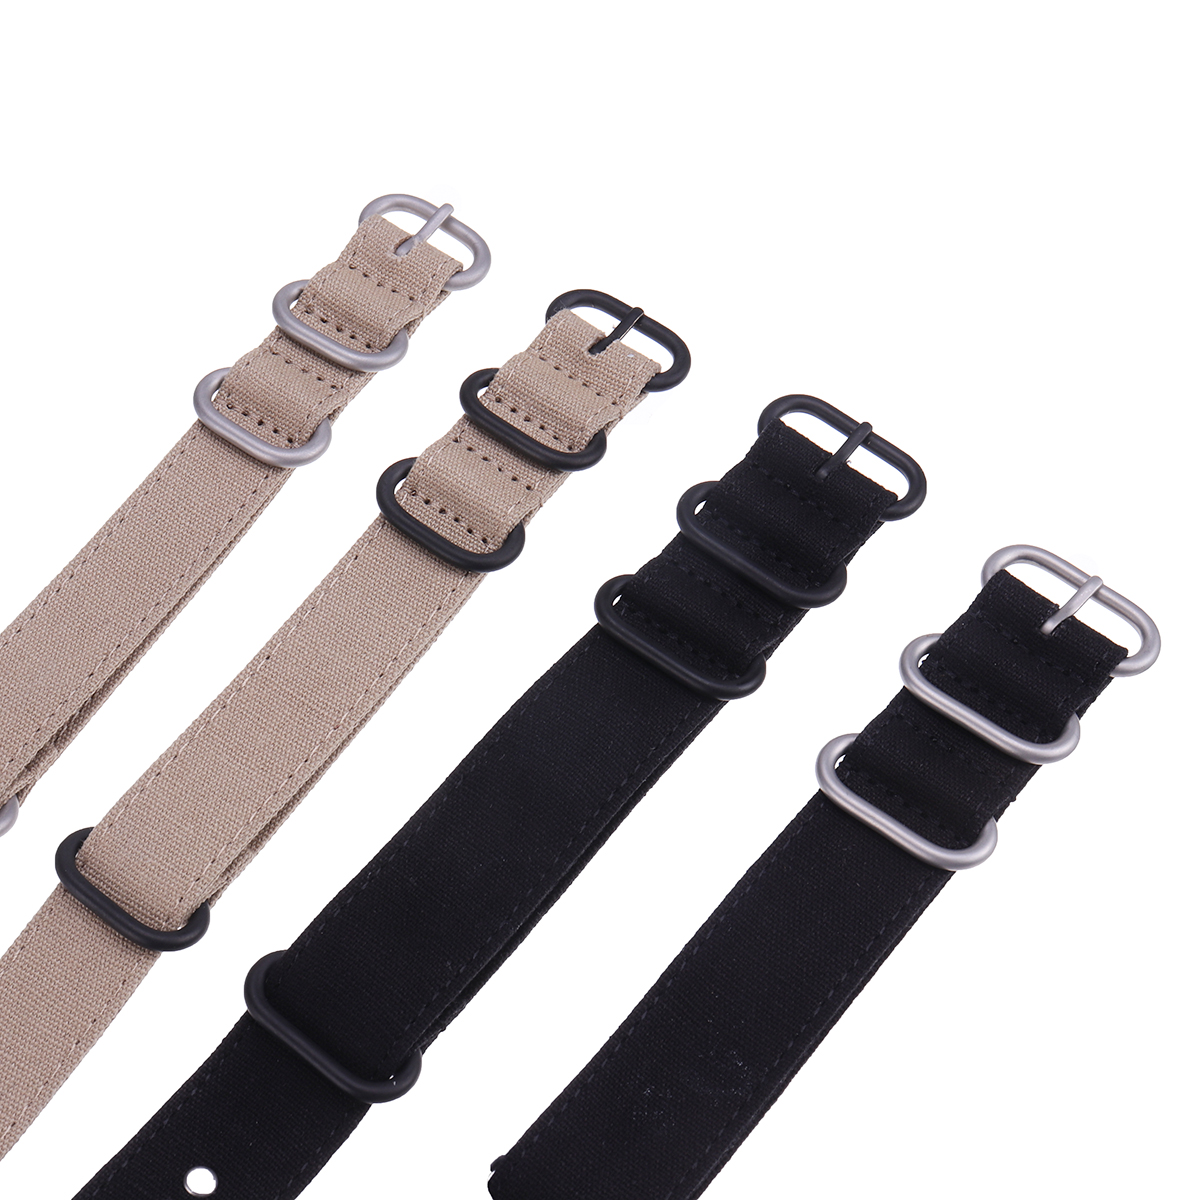 Bakeey-22mm-Multicolor-Thicken-Durable-Military-Canvas-Nylon-Watch-Band-Strap-1433326-2